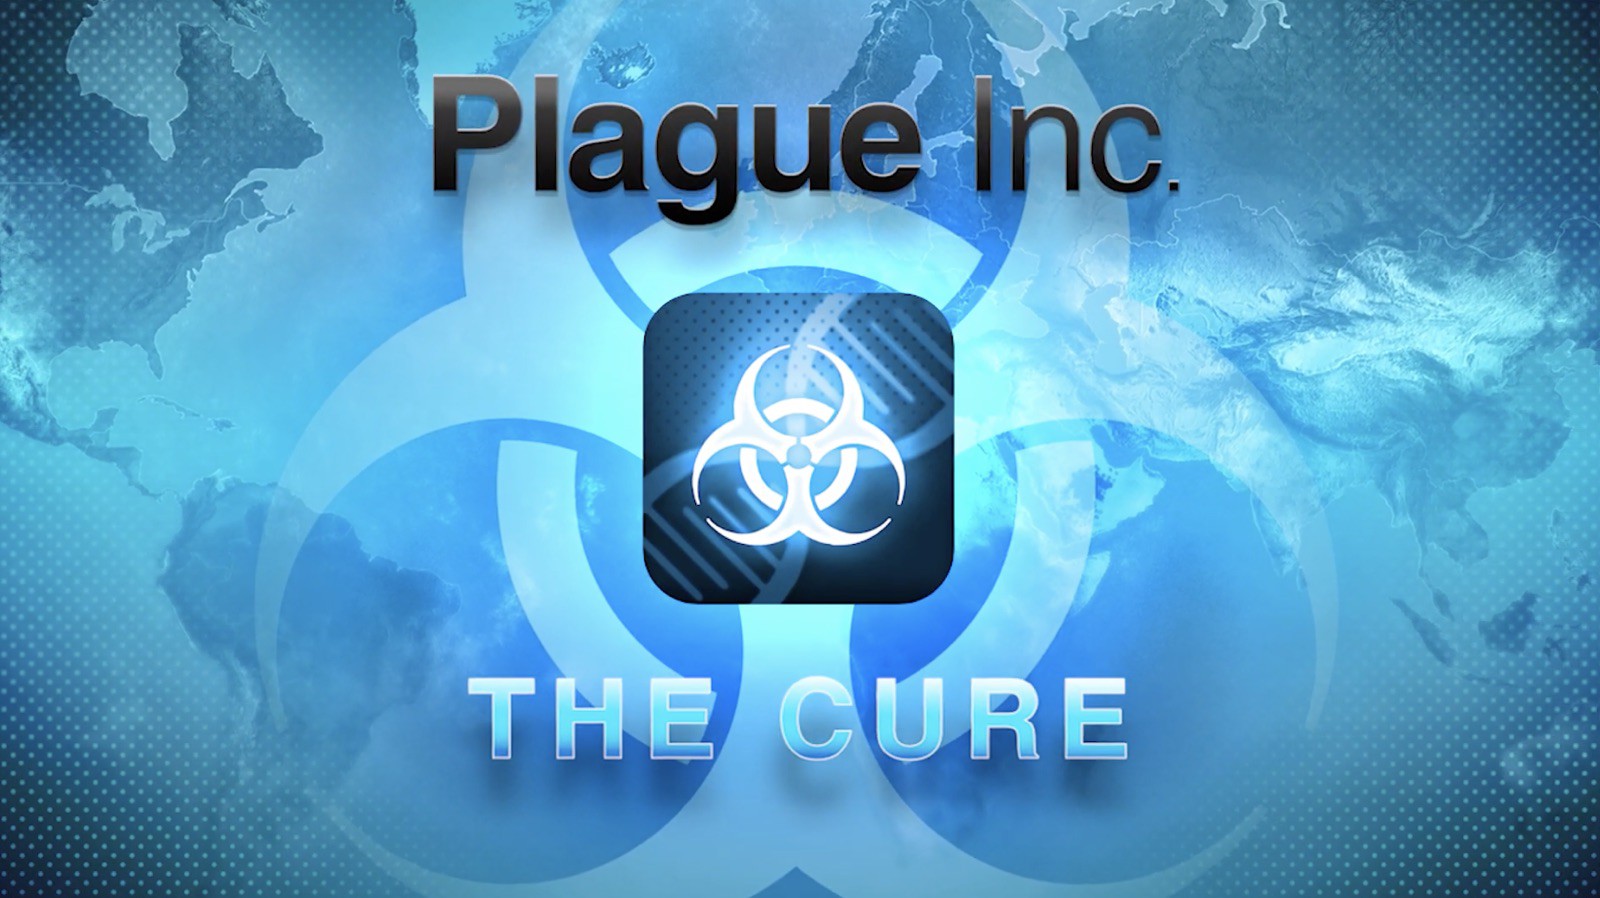 instal the last version for apple Disease Infected: Plague